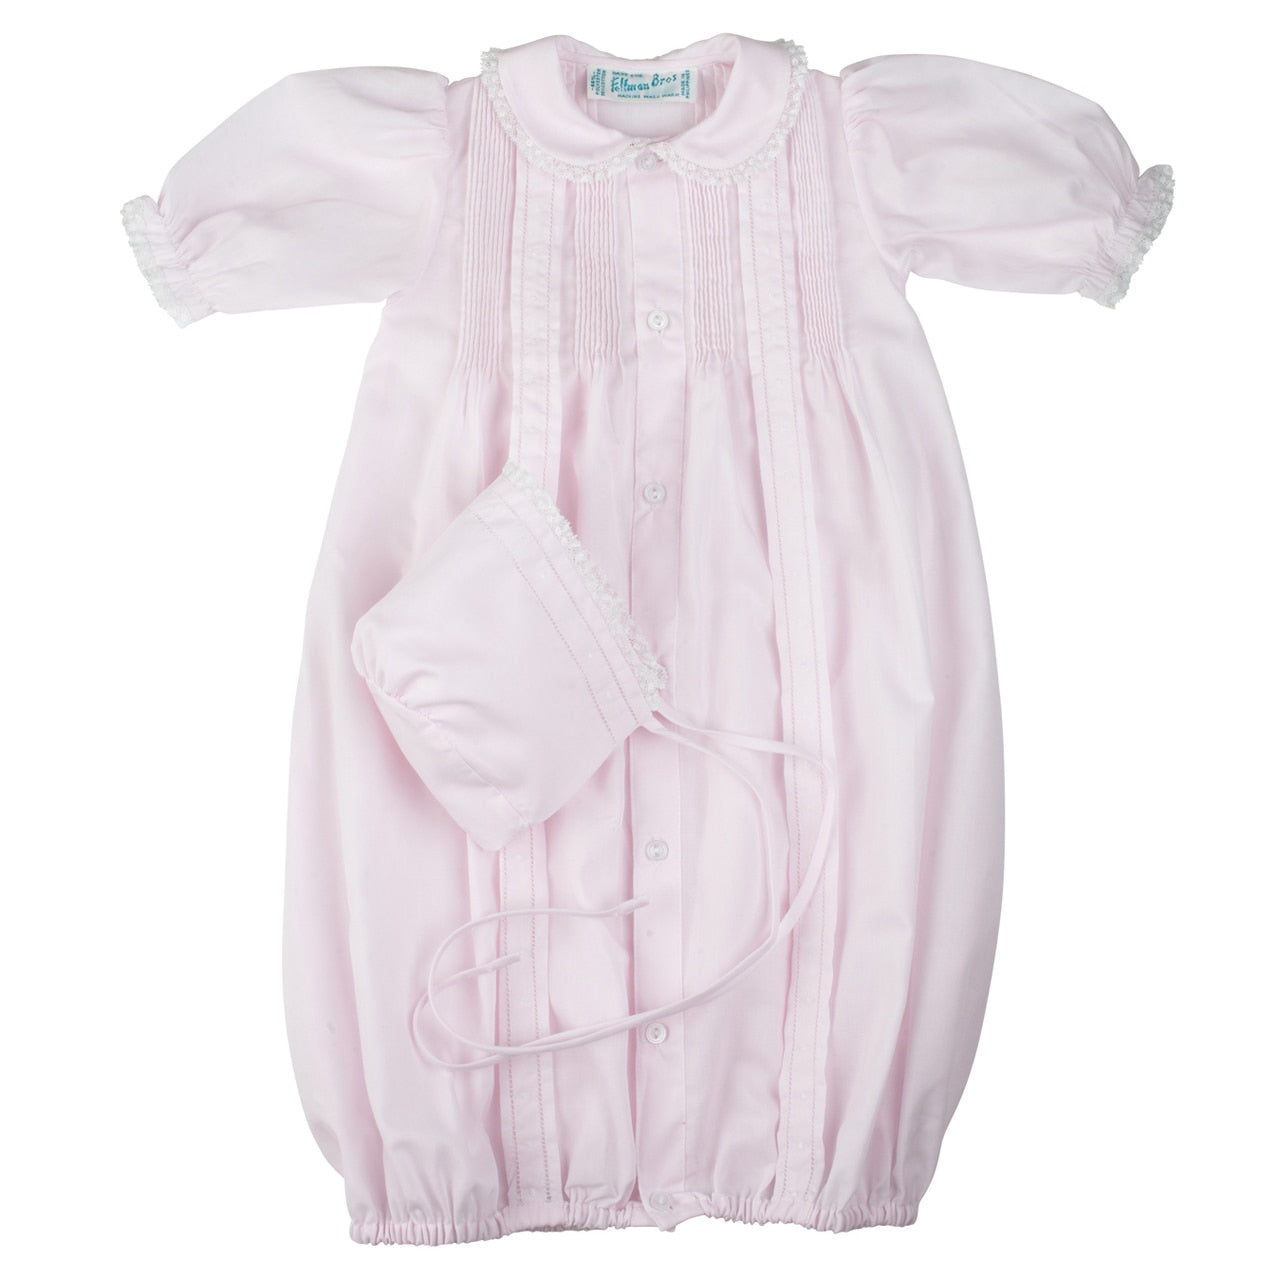 Feltman Bros Pink Take Me Home Gown and Hat Newborn